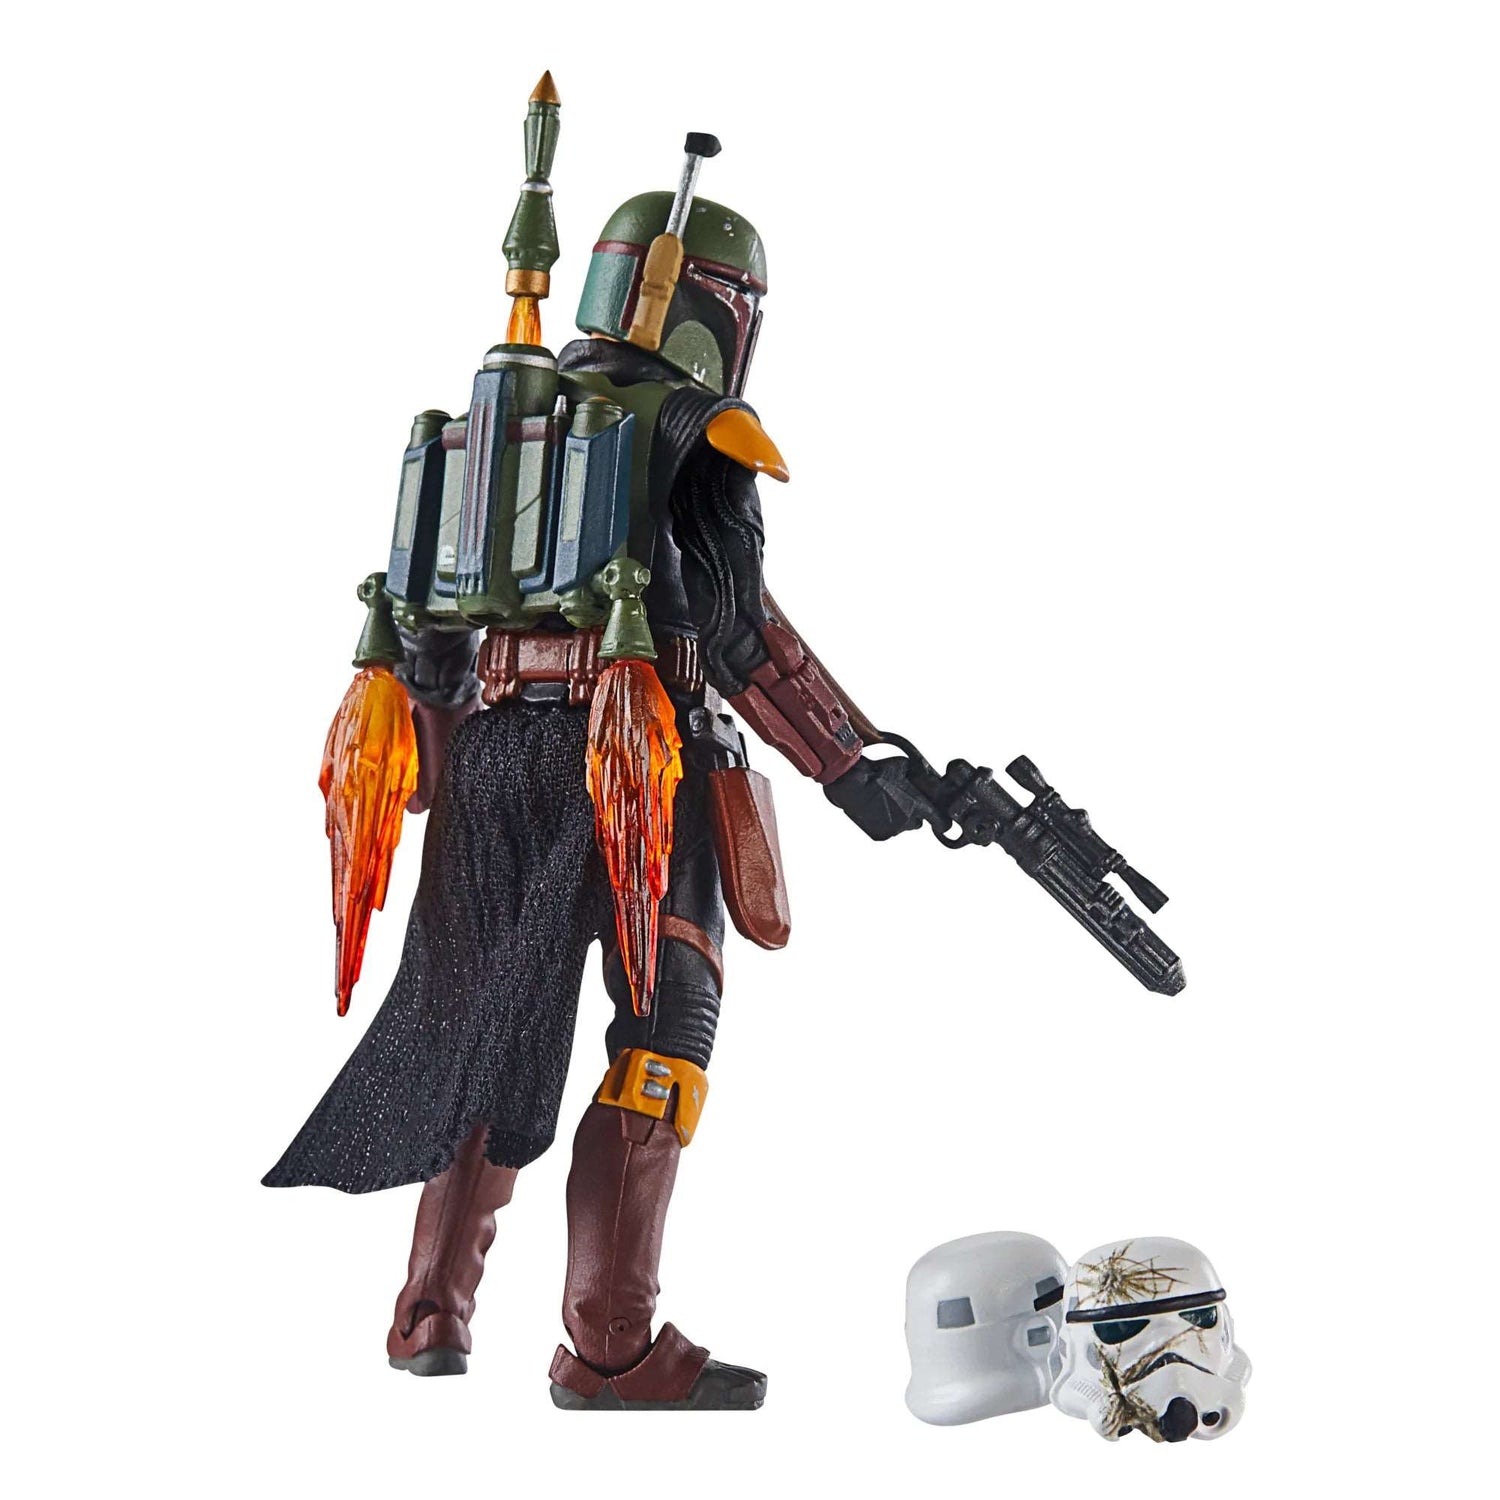 Hasbro Disney Plus Book of Boba Fett Star Wars The Black Series Boba Fett Tatooine action figure with accessories and helmet